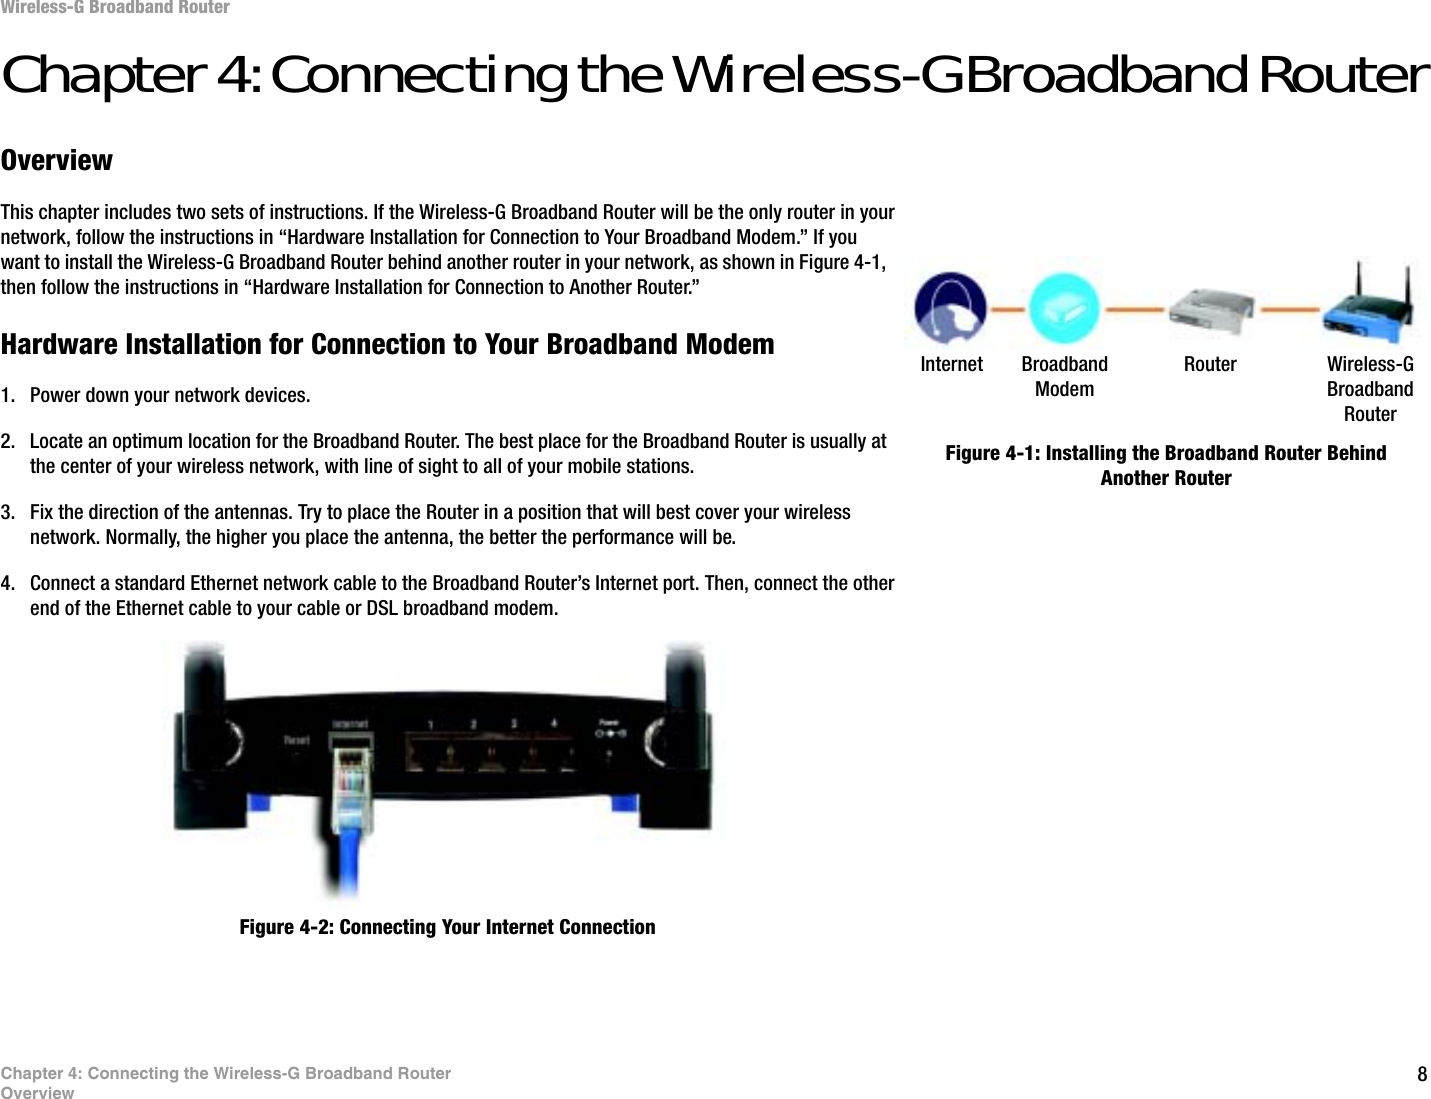 8Chapter 4: Connecting the Wireless-G Broadband RouterOverviewWireless-G Broadband RouterChapter 4: Connecting the Wireless-G Broadband RouterOverviewThis chapter includes two sets of instructions. If the Wireless-G Broadband Router will be the only router in your network, follow the instructions in “Hardware Installation for Connection to Your Broadband Modem.” If you want to install the Wireless-G Broadband Router behind another router in your network, as shown in Figure 4-1, then follow the instructions in “Hardware Installation for Connection to Another Router.”Hardware Installation for Connection to Your Broadband Modem1. Power down your network devices.2. Locate an optimum location for the Broadband Router. The best place for the Broadband Router is usually at the center of your wireless network, with line of sight to all of your mobile stations.3. Fix the direction of the antennas. Try to place the Router in a position that will best cover your wireless network. Normally, the higher you place the antenna, the better the performance will be.4. Connect a standard Ethernet network cable to the Broadband Router’s Internet port. Then, connect the other end of the Ethernet cable to your cable or DSL broadband modem.Figure 4-1: Installing the Broadband Router Behind Another RouterFigure 4-2: Connecting Your Internet ConnectionInternet BroadbandModemRouter Wireless-G Broadband Router